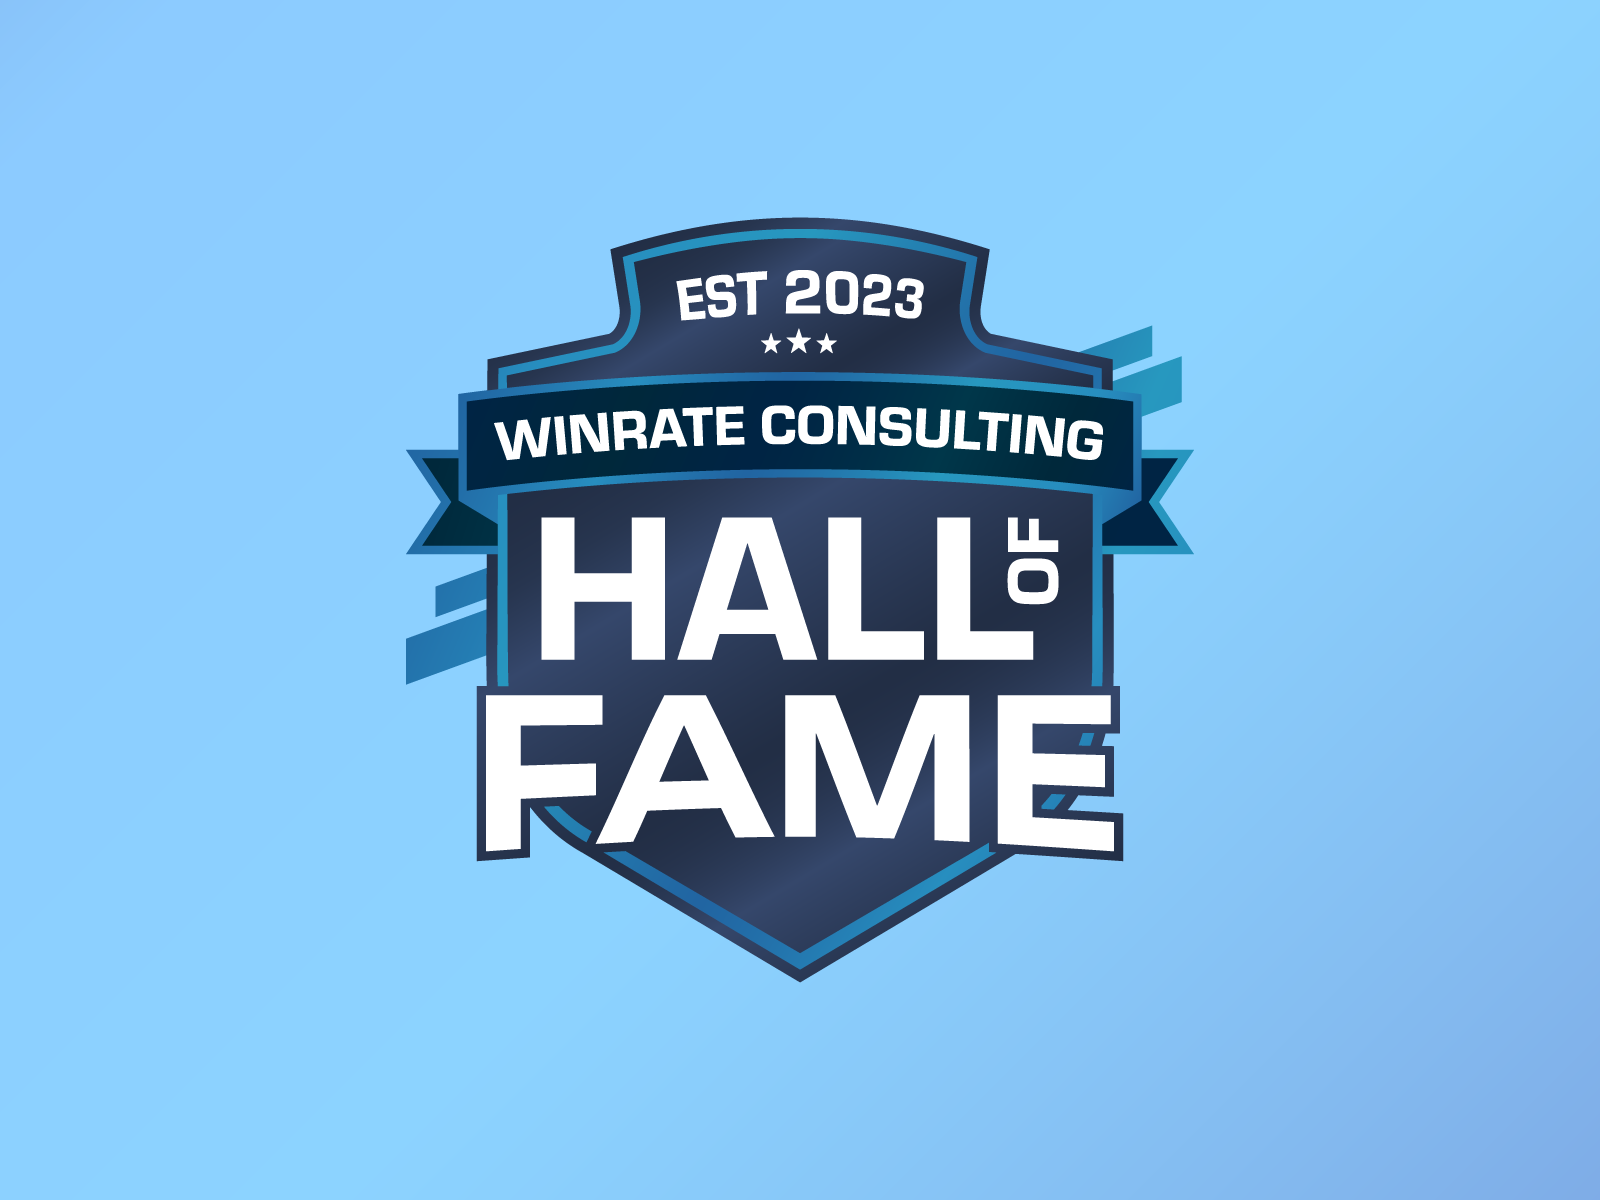 Logo for WinRate Hall of Fame